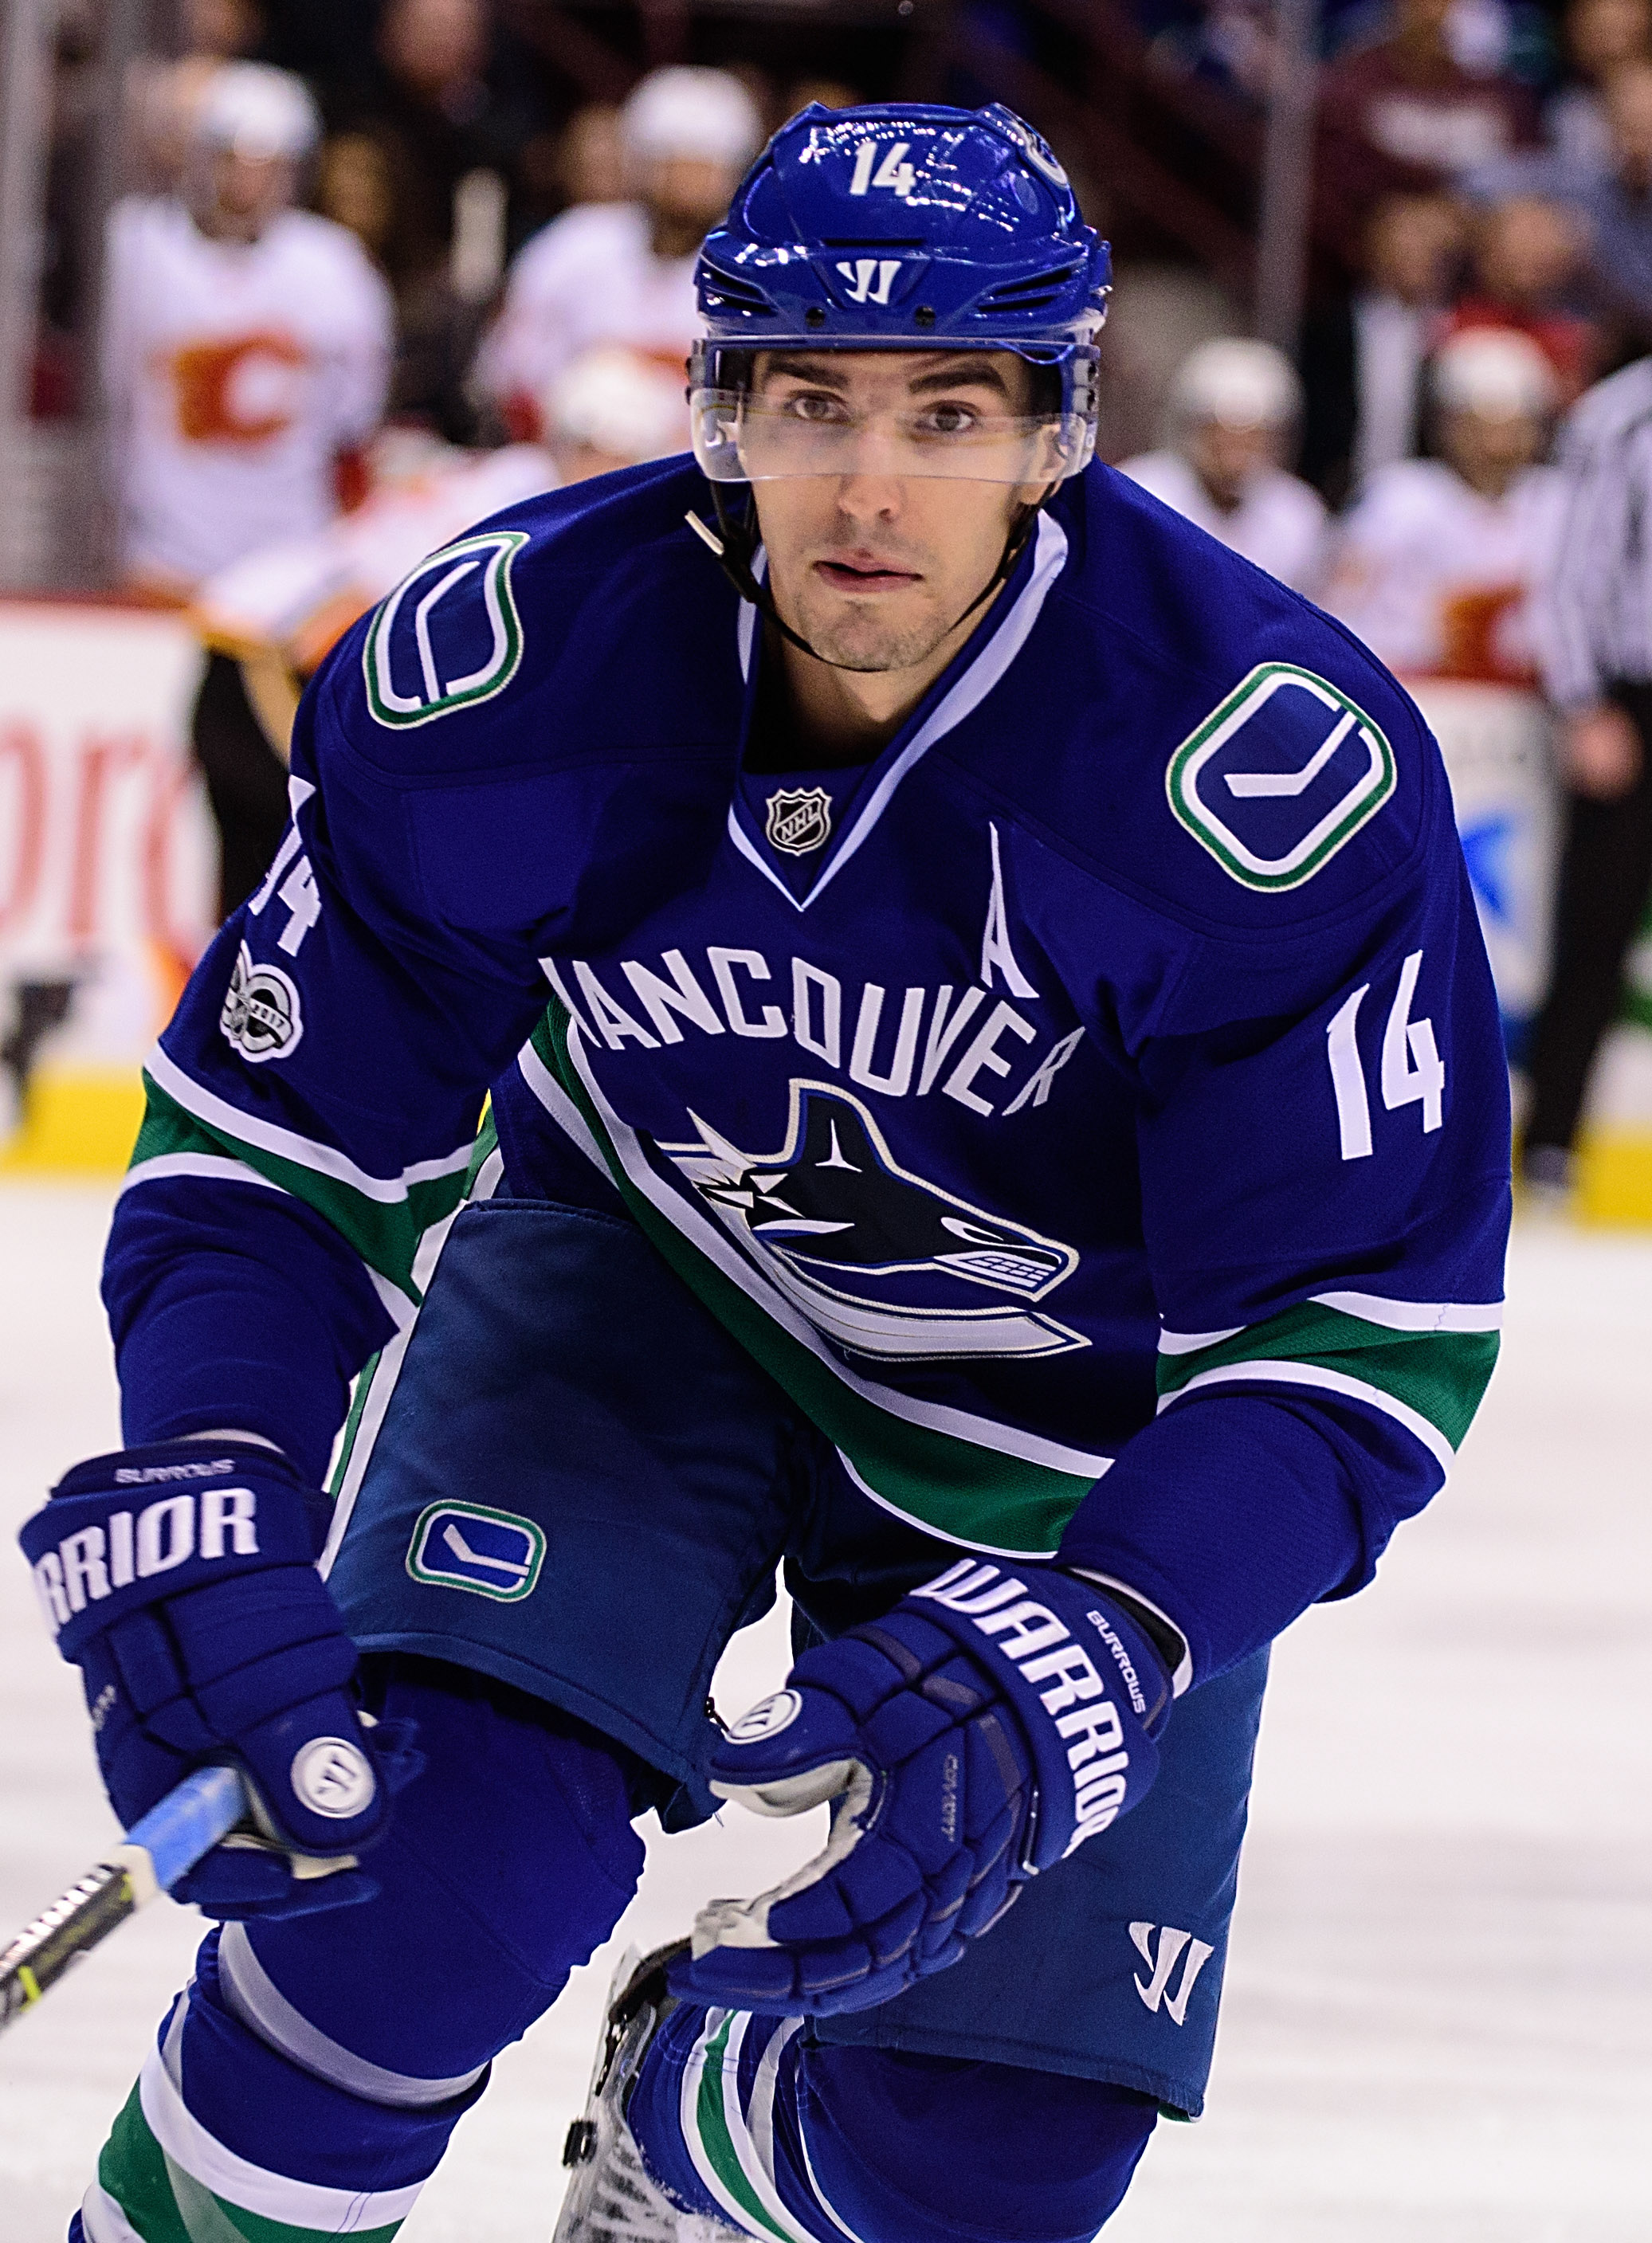 Burrows re-signs with Canucks